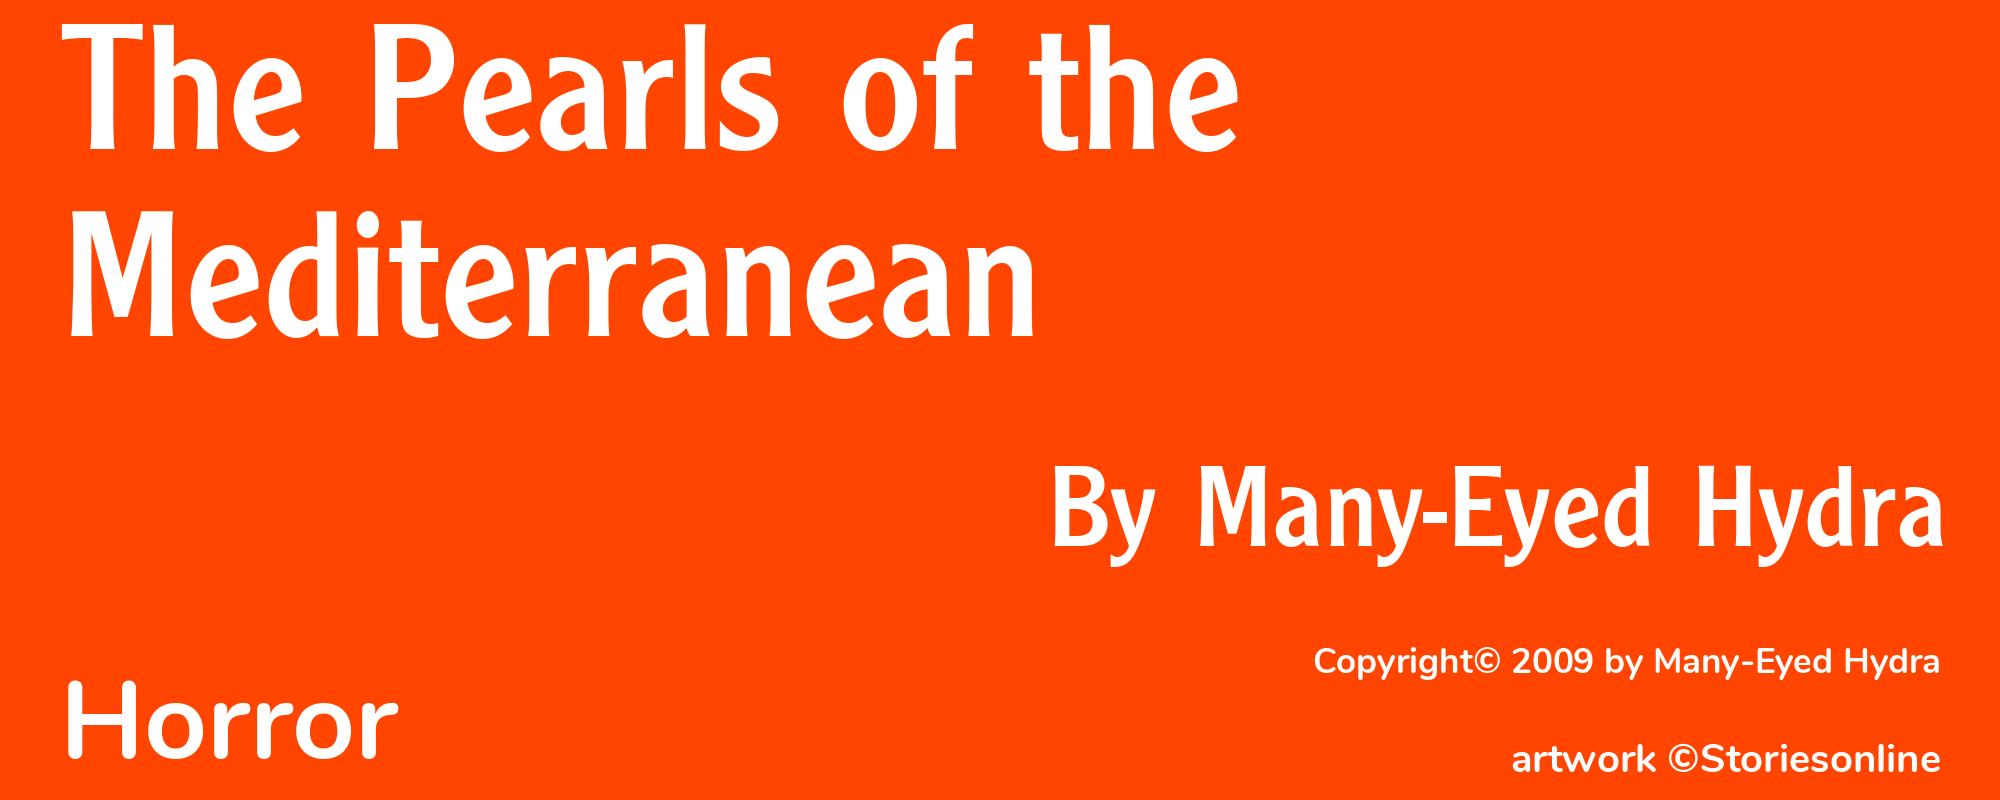 The Pearls of the Mediterranean - Cover